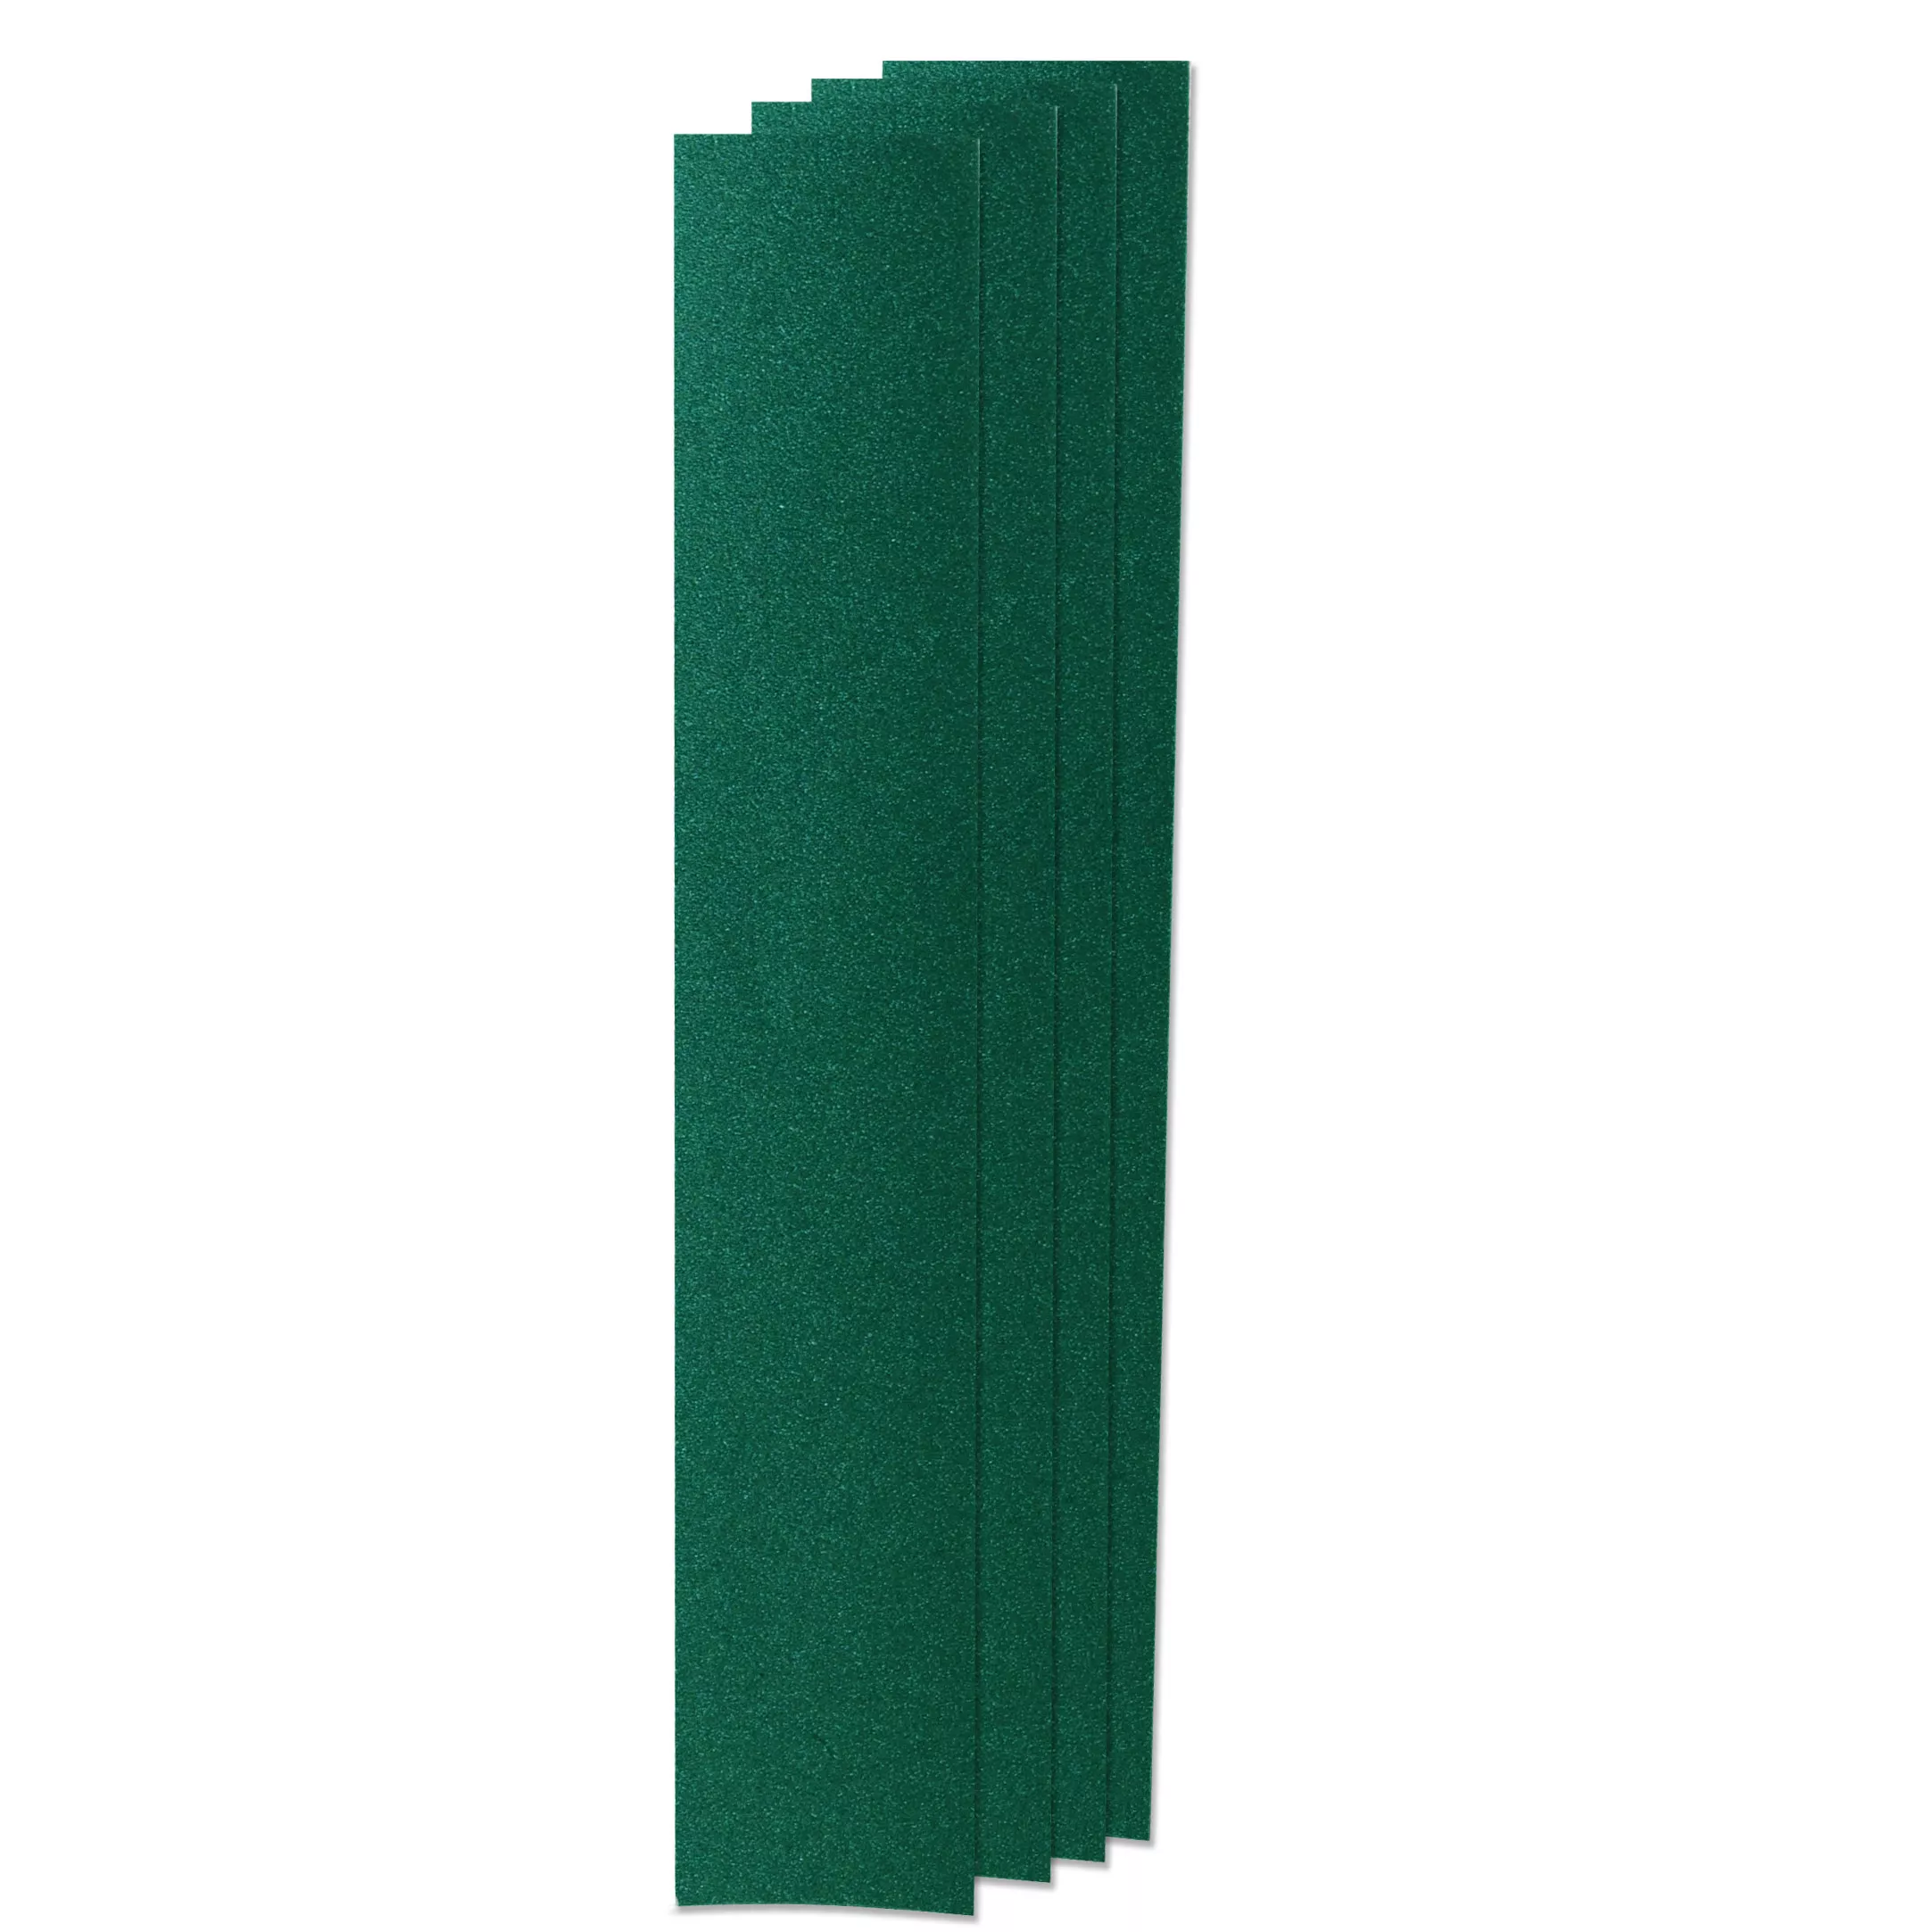 3M™ Green Corps™ Hookit™ Sheet, 02640, 40, 4 1/2 in x 30 in, 10 sheets
per pack, 5 packs per case